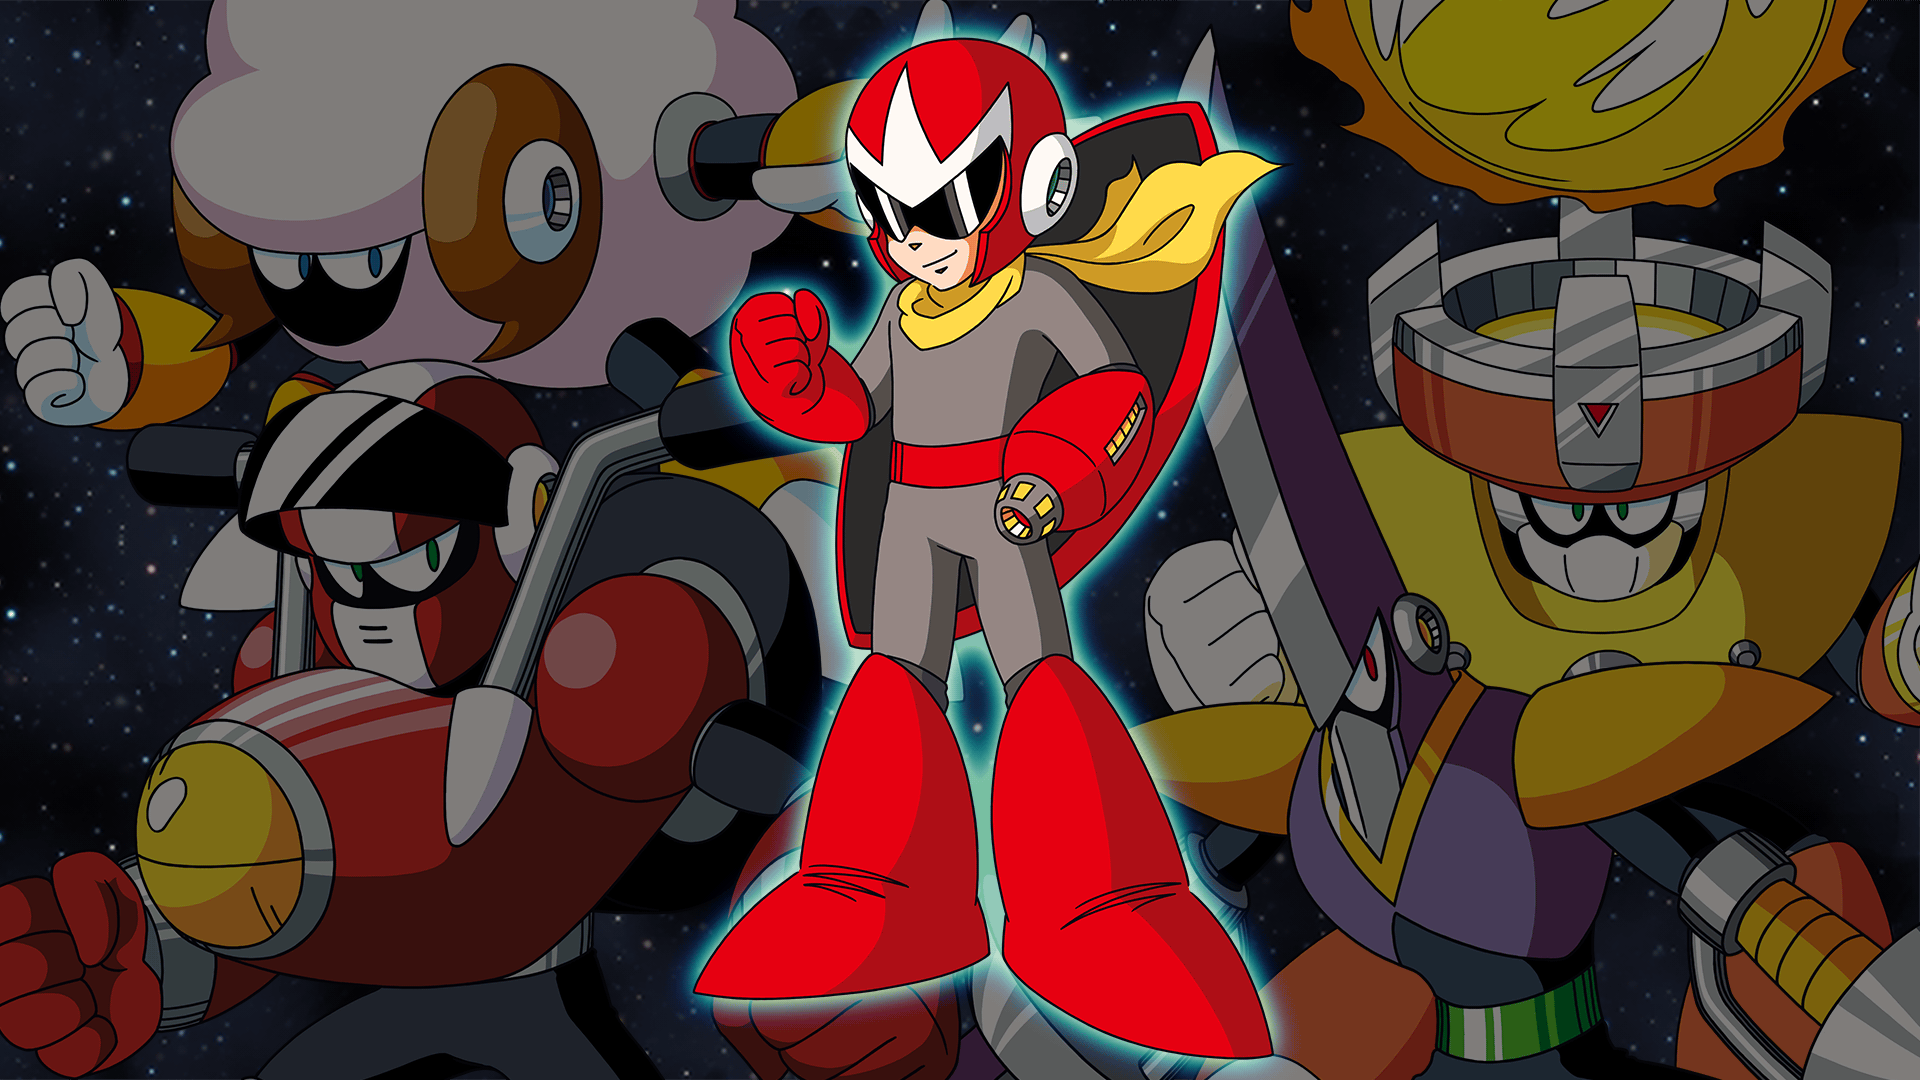 Icon for The Threat from Space! Proto Man